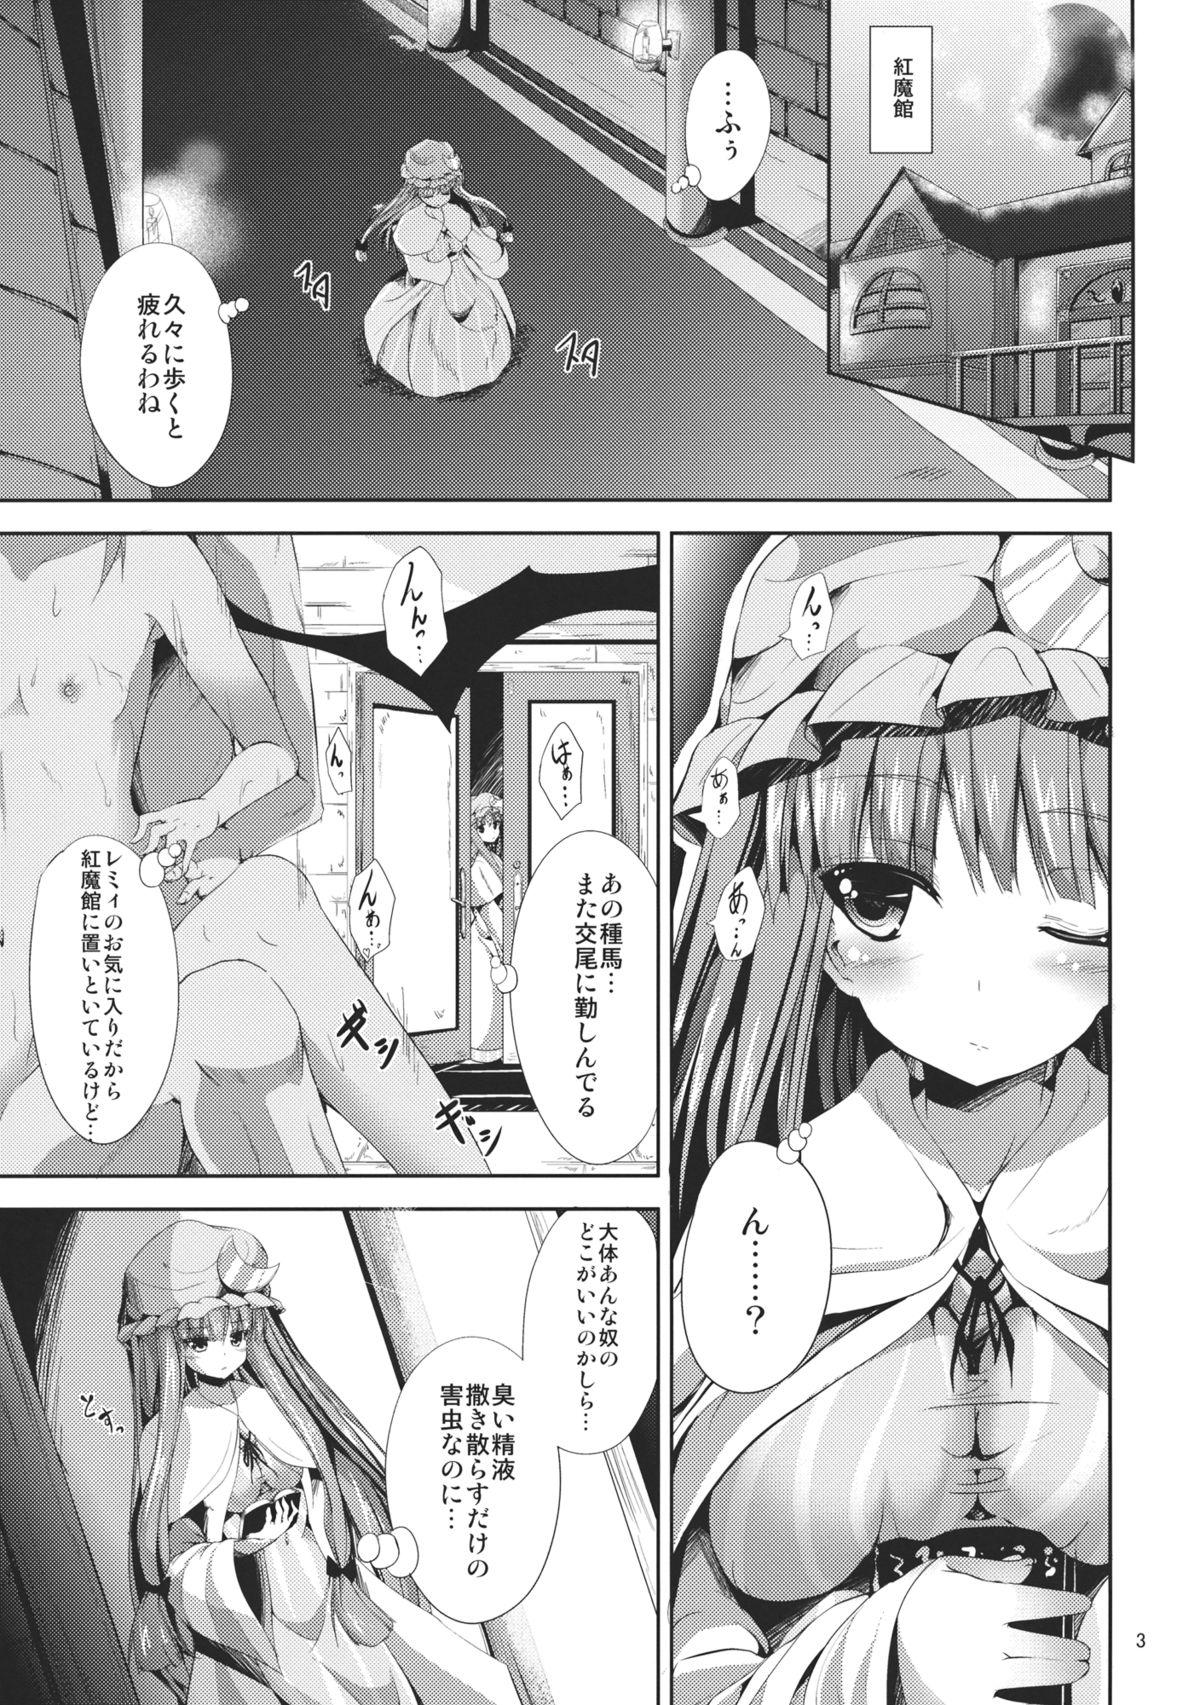 Korean Sweet nothingS - Touhou project Pov Sex - Page 3